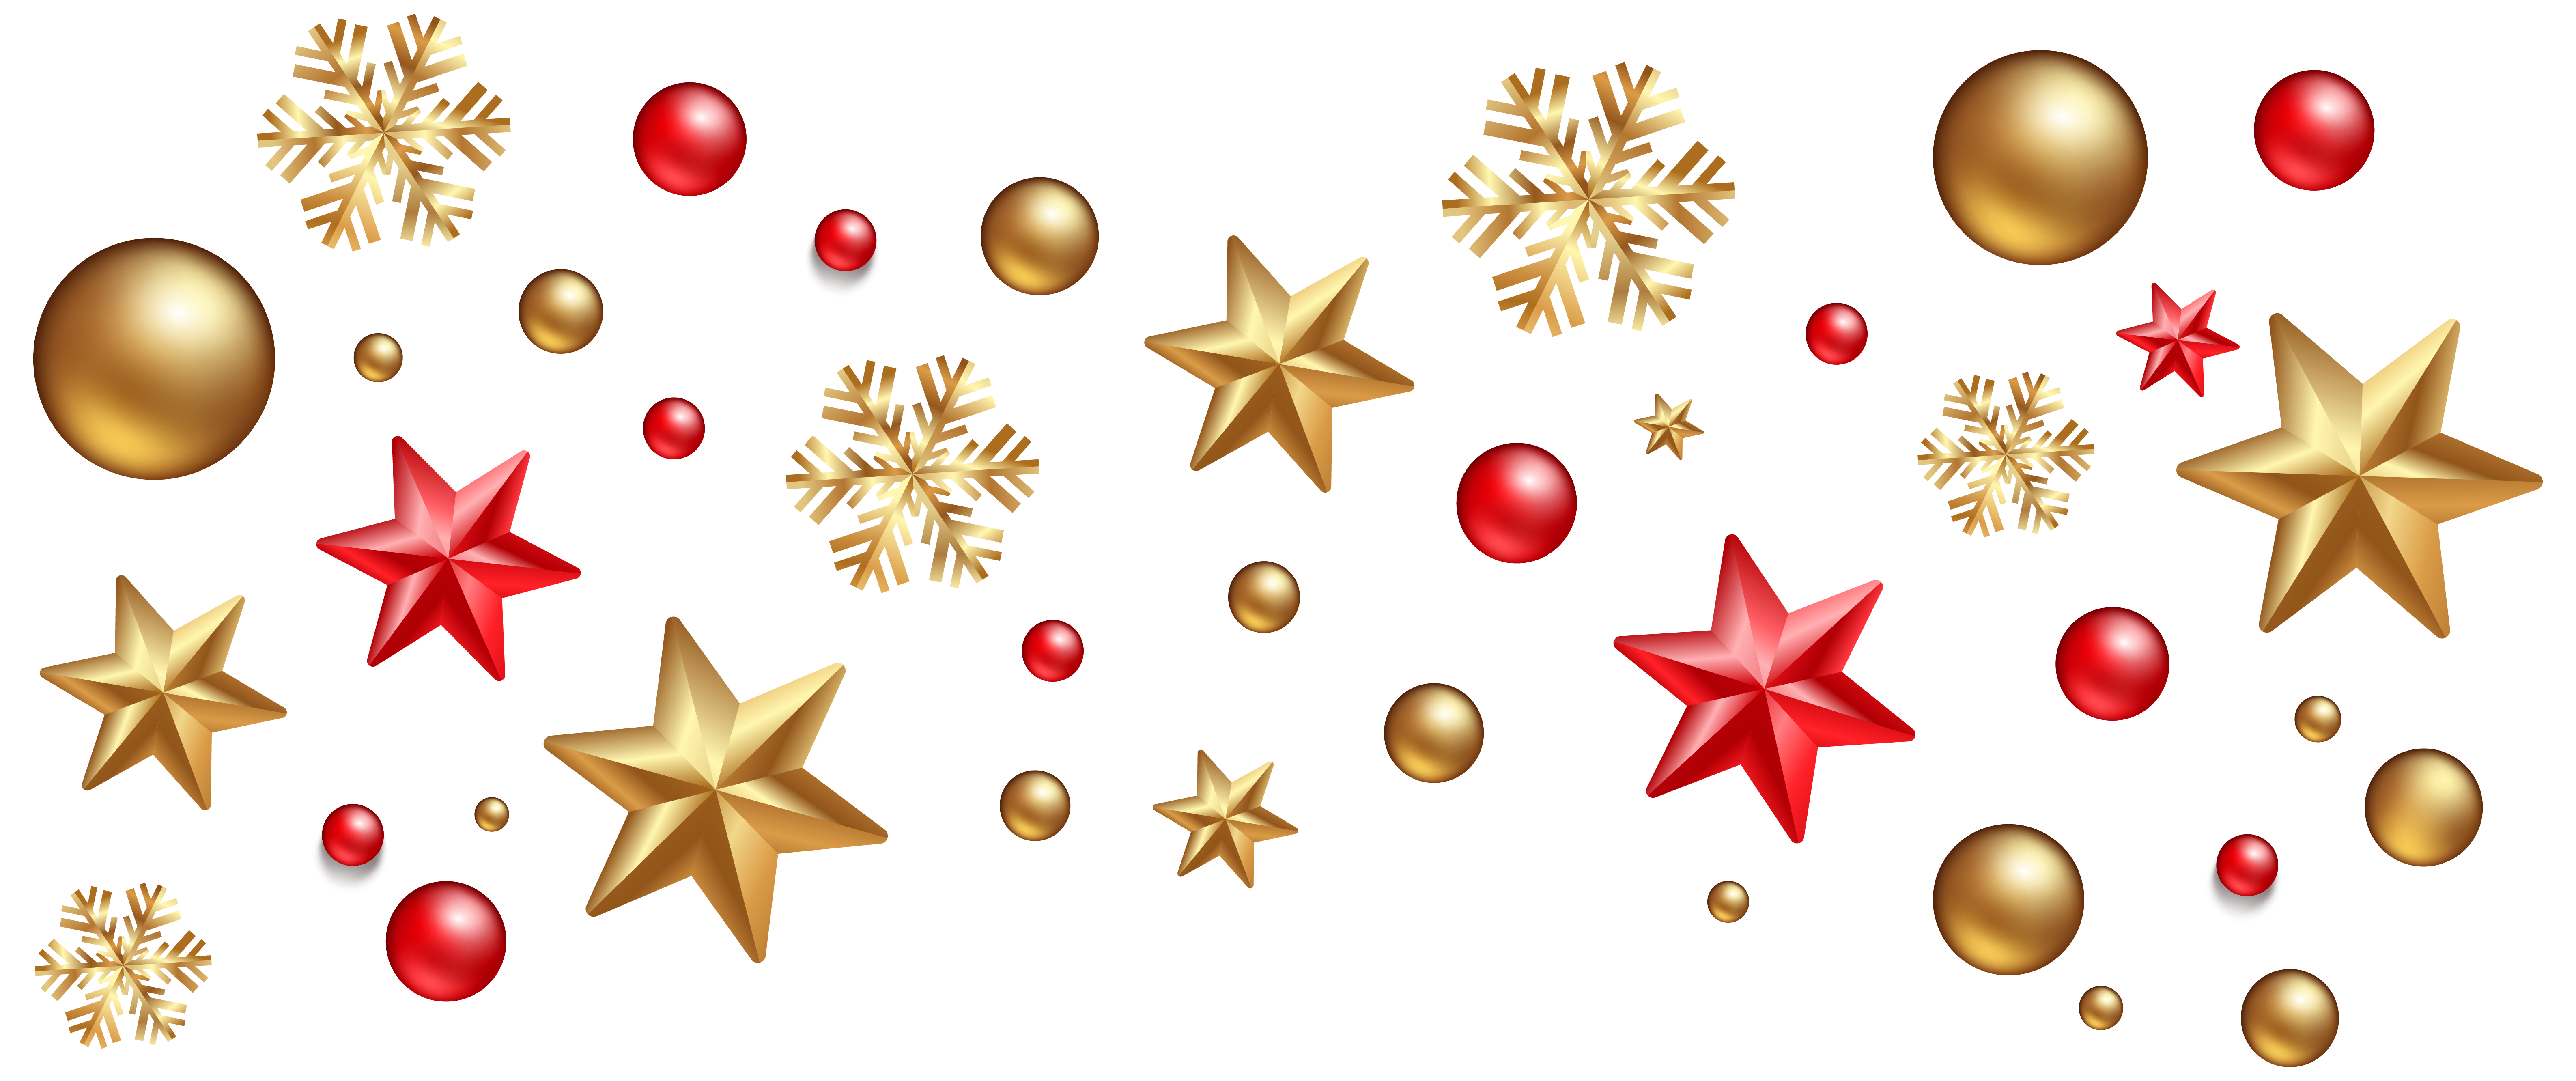 free clipart holiday decorations - photo #35